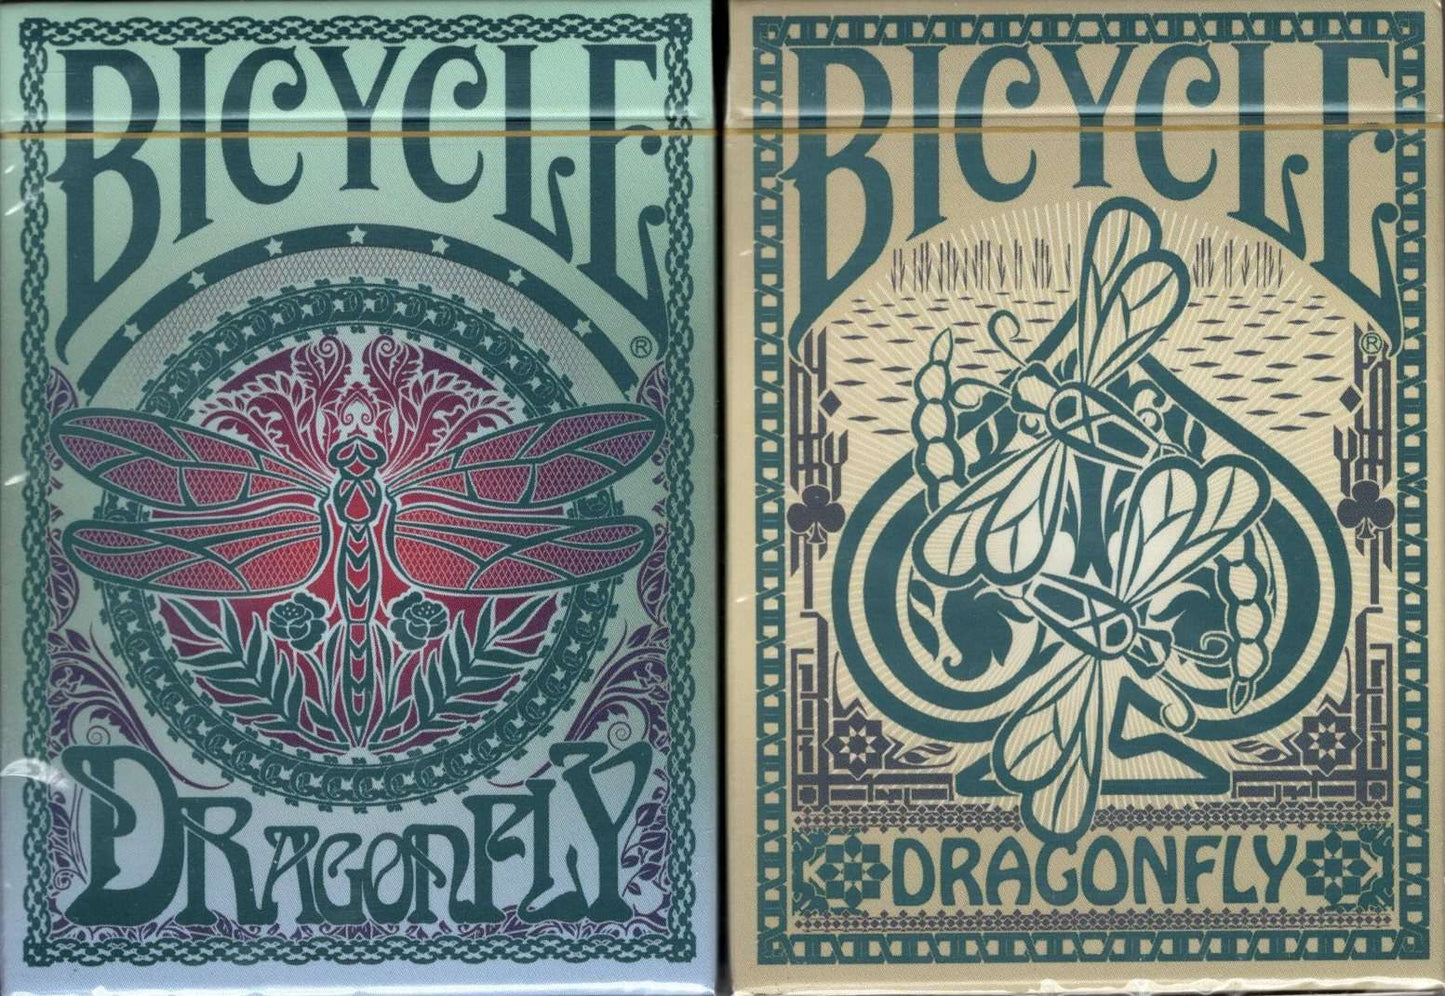 PlayingCardDecks.com-Dragonfly Gilded Bicycle Playing Cards: 2 Deck Set